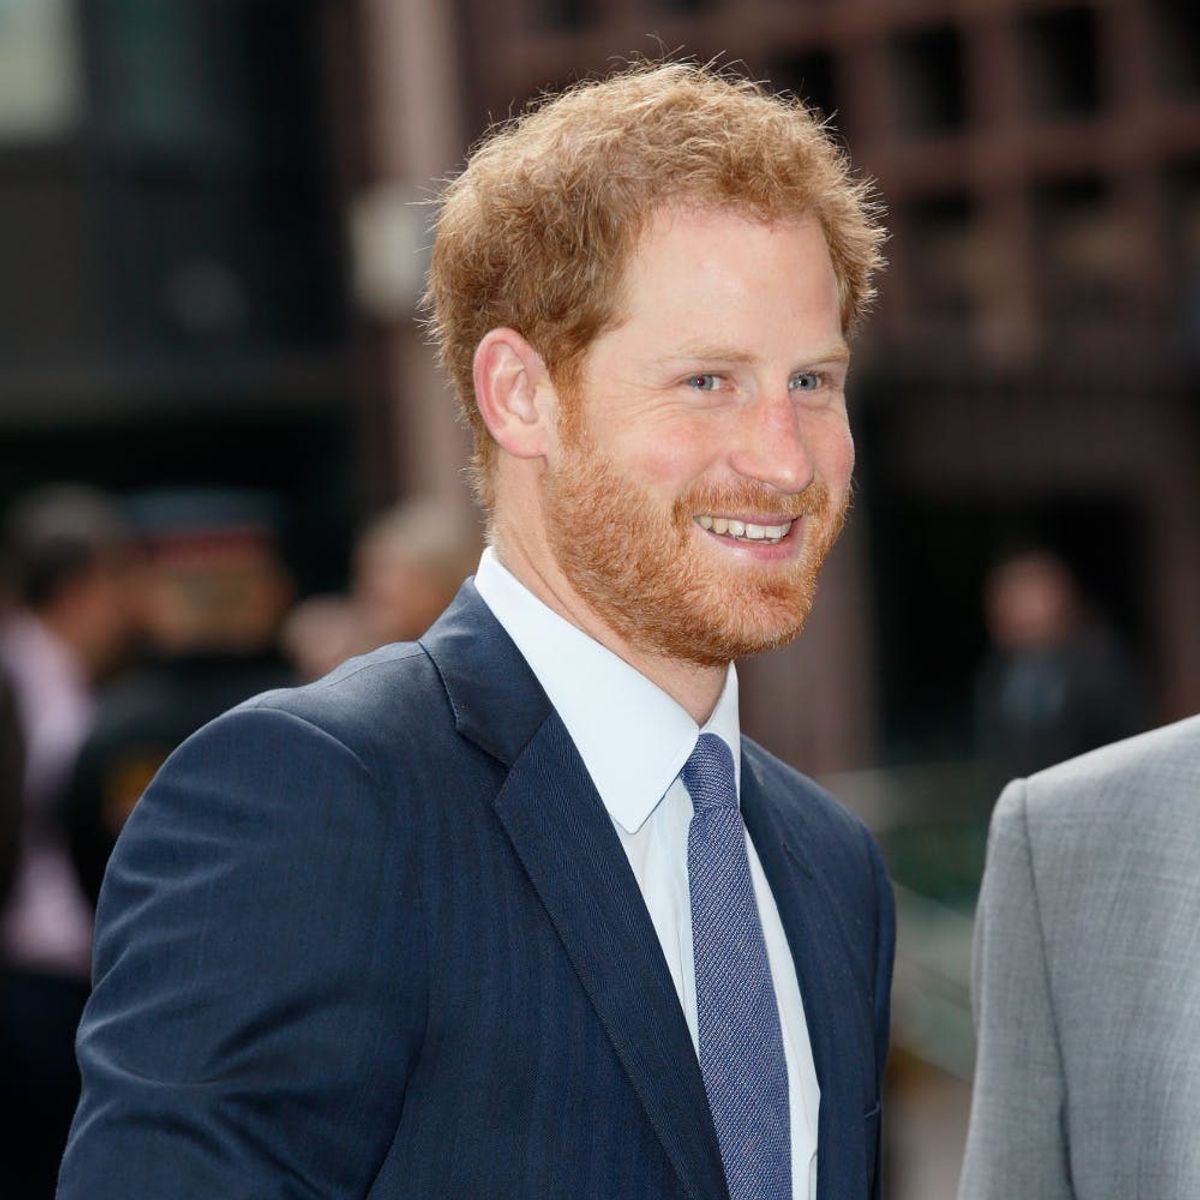 Prince Harry Is Serious About Meghan Markle and Friends Are Predicting an Engagement SOON